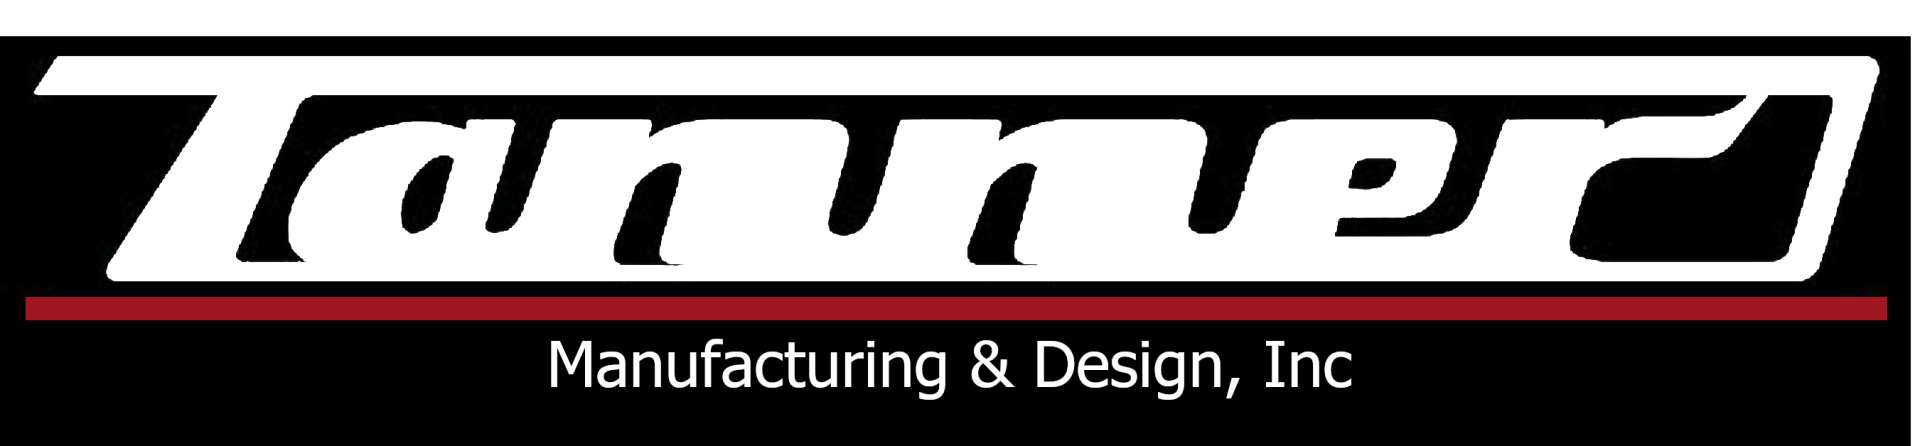 Tanner Manufacturing